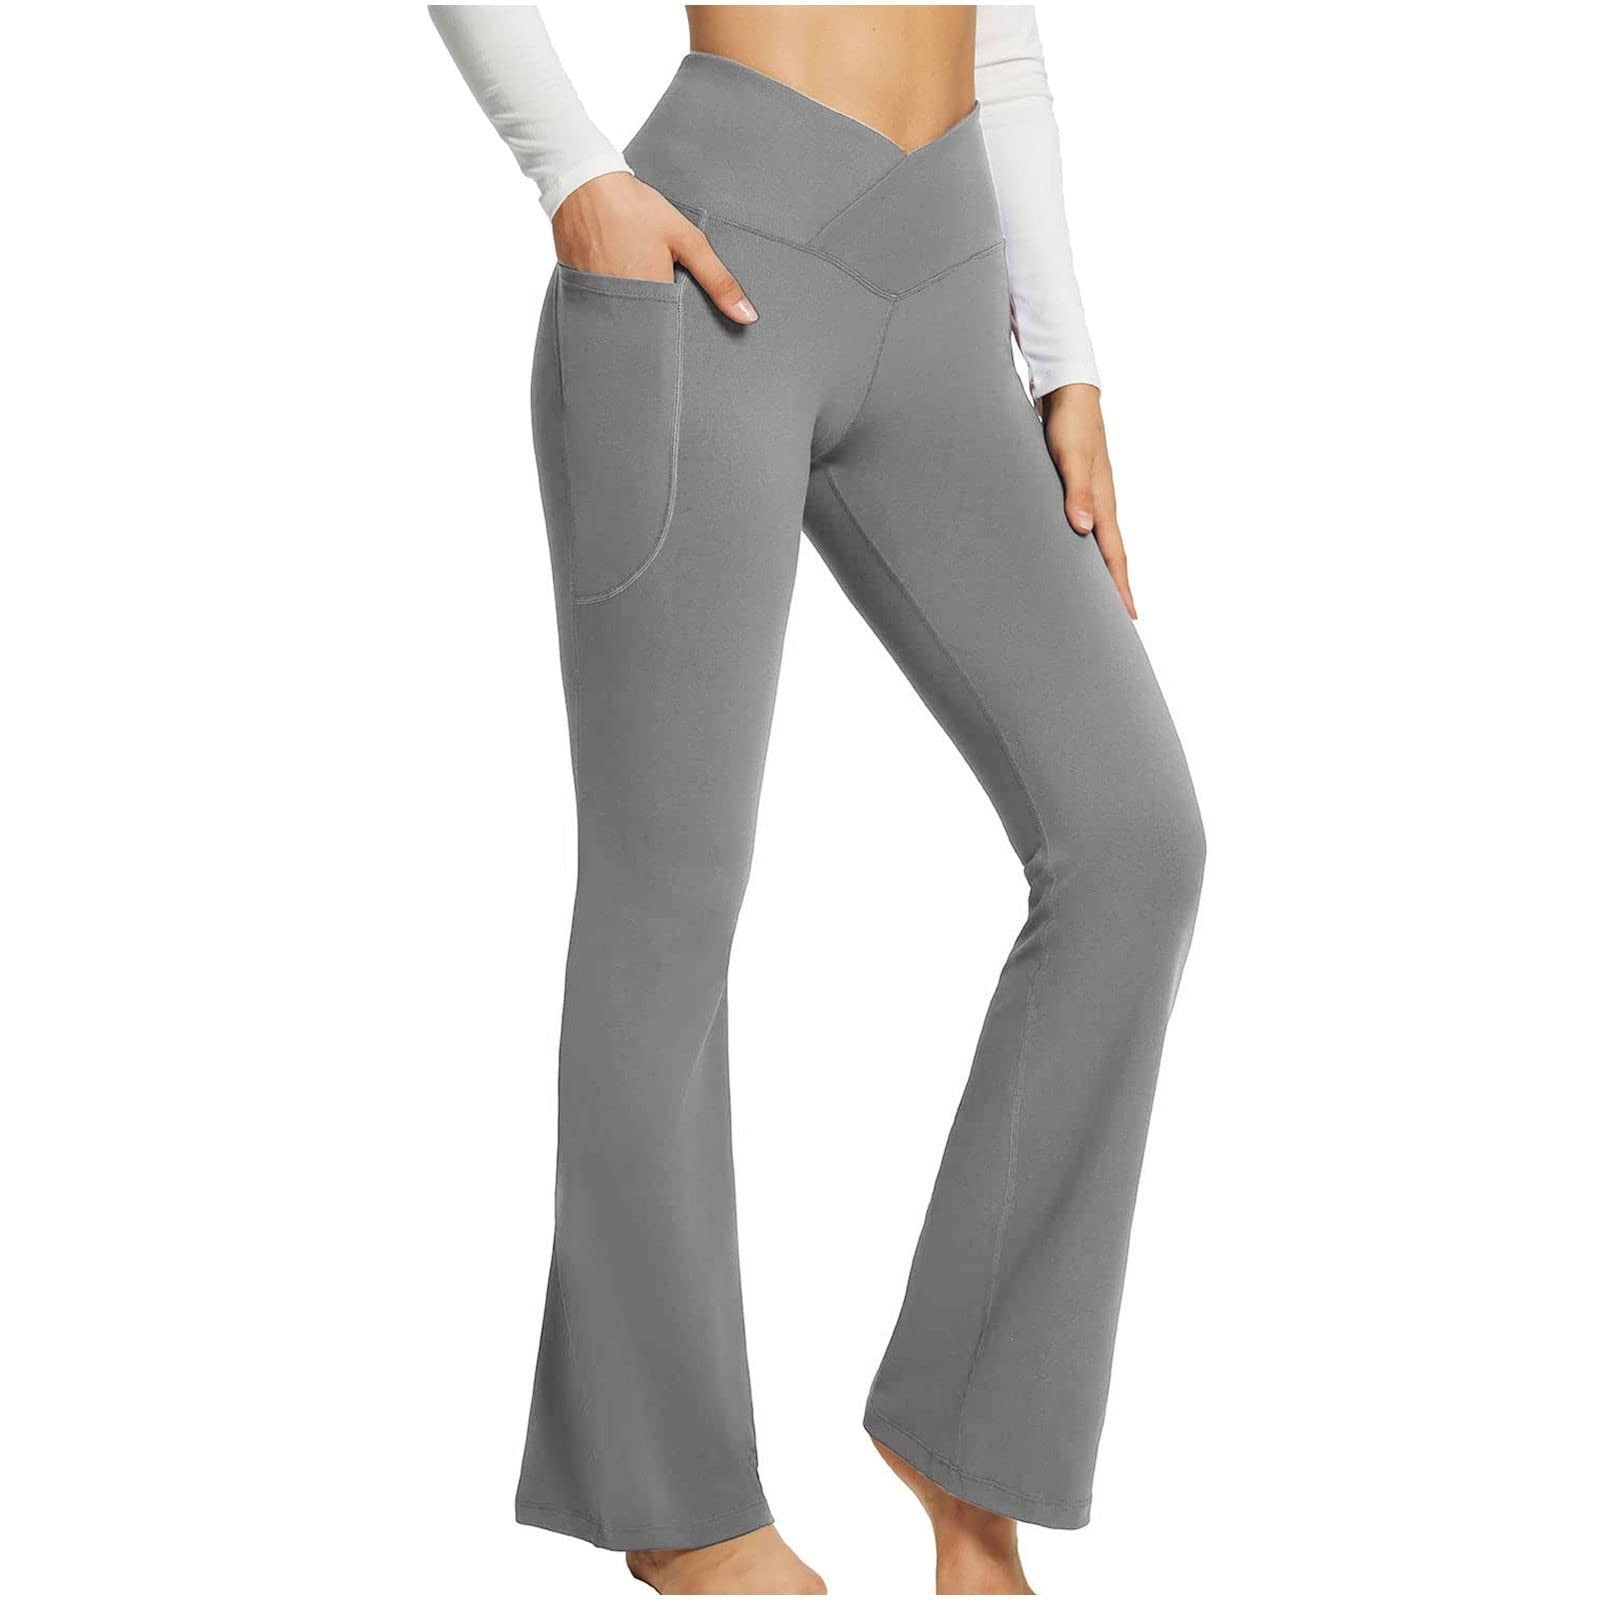 Women's Sale Bottoms, Up to 40% Off – Tagged Leggings Page 2